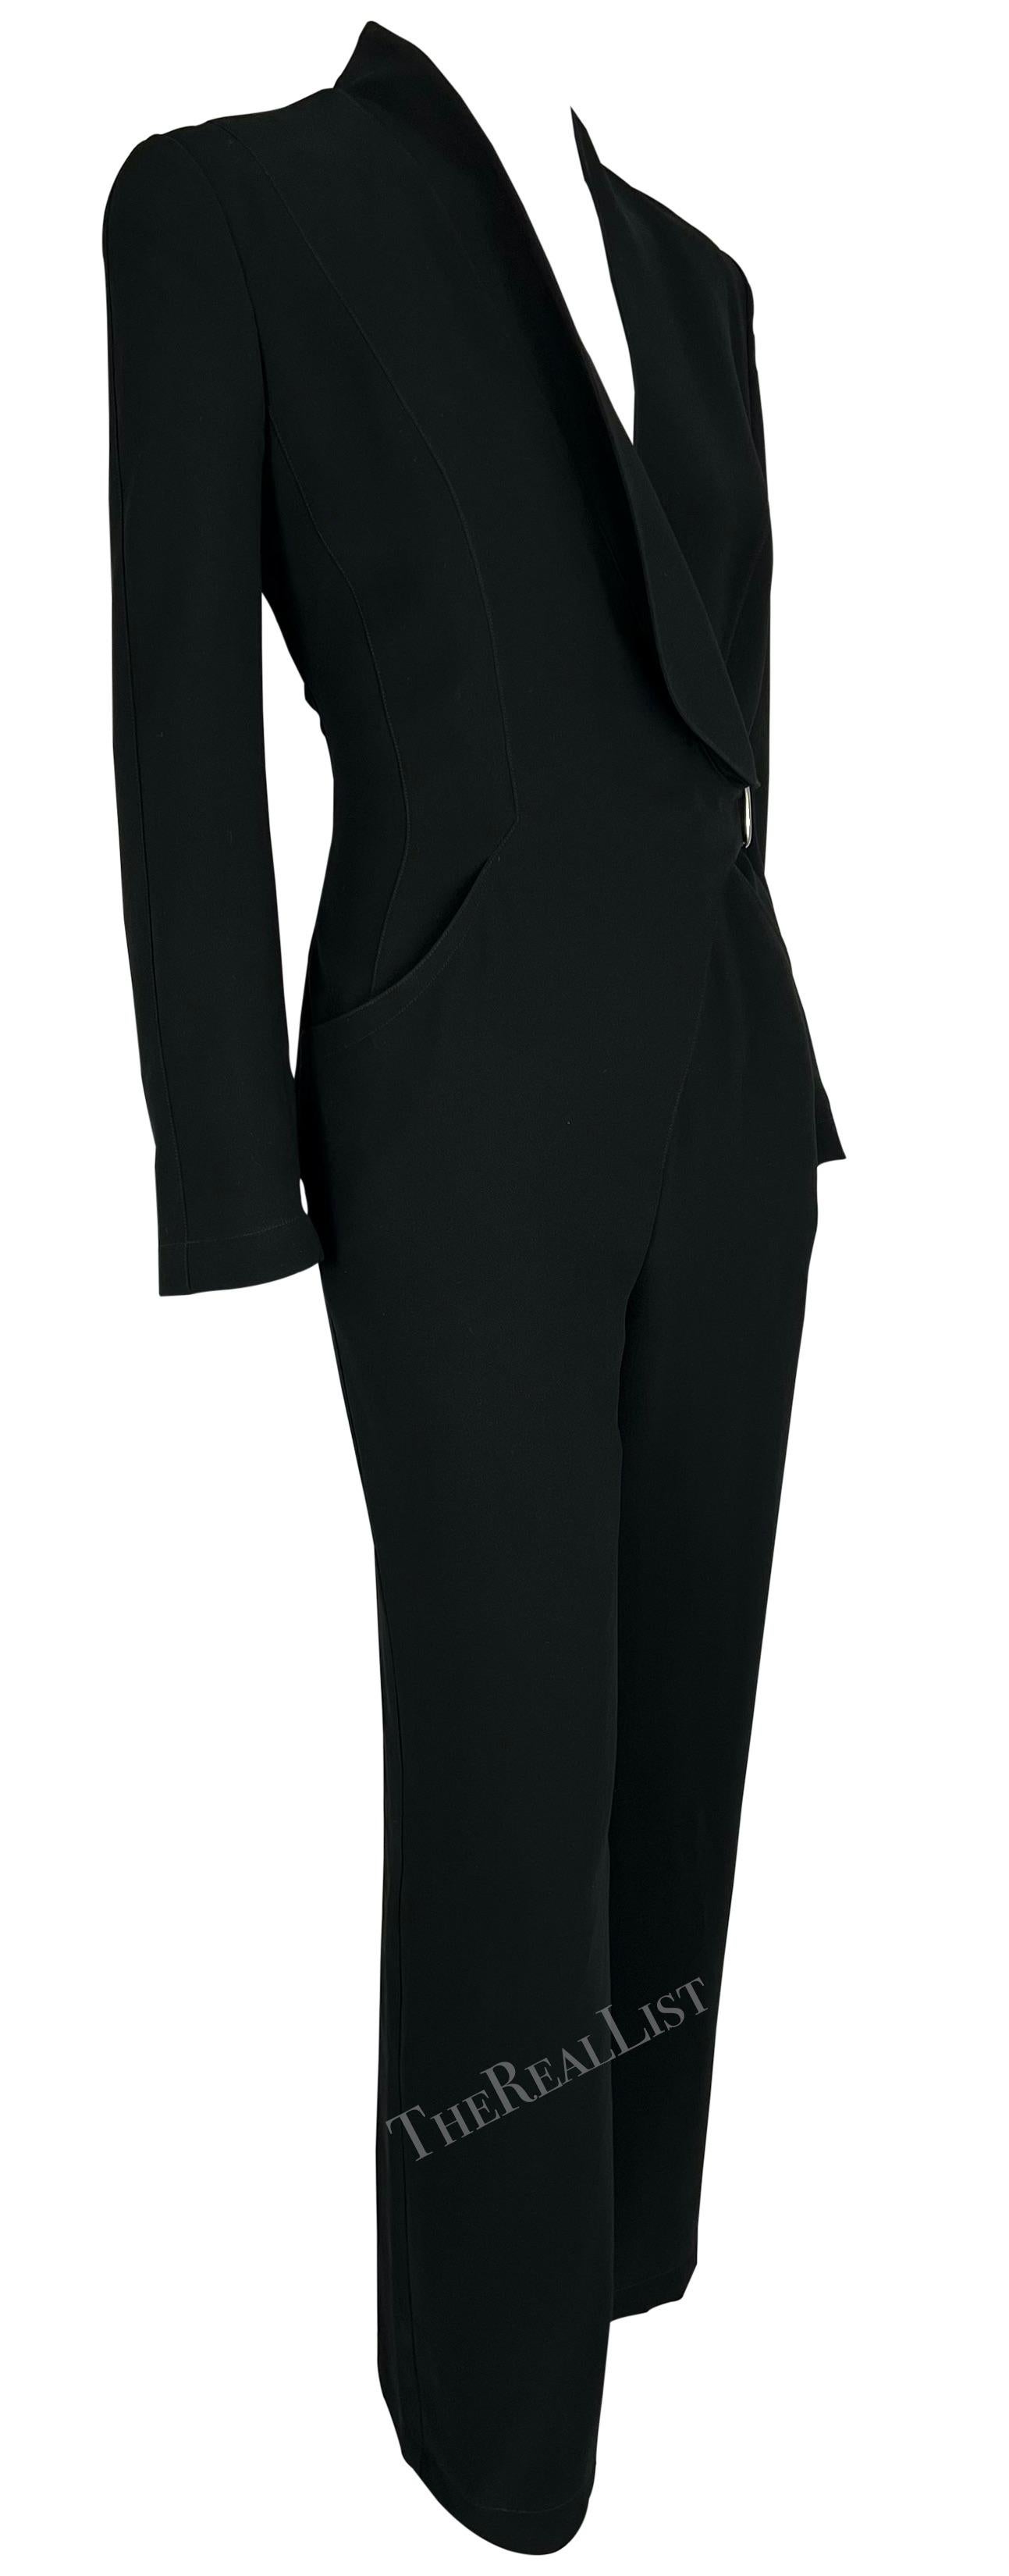 F/W 1999 Thierry Mugler Black Jumpsuit Oversized Metal Buckle Plunge Suit For Sale 4